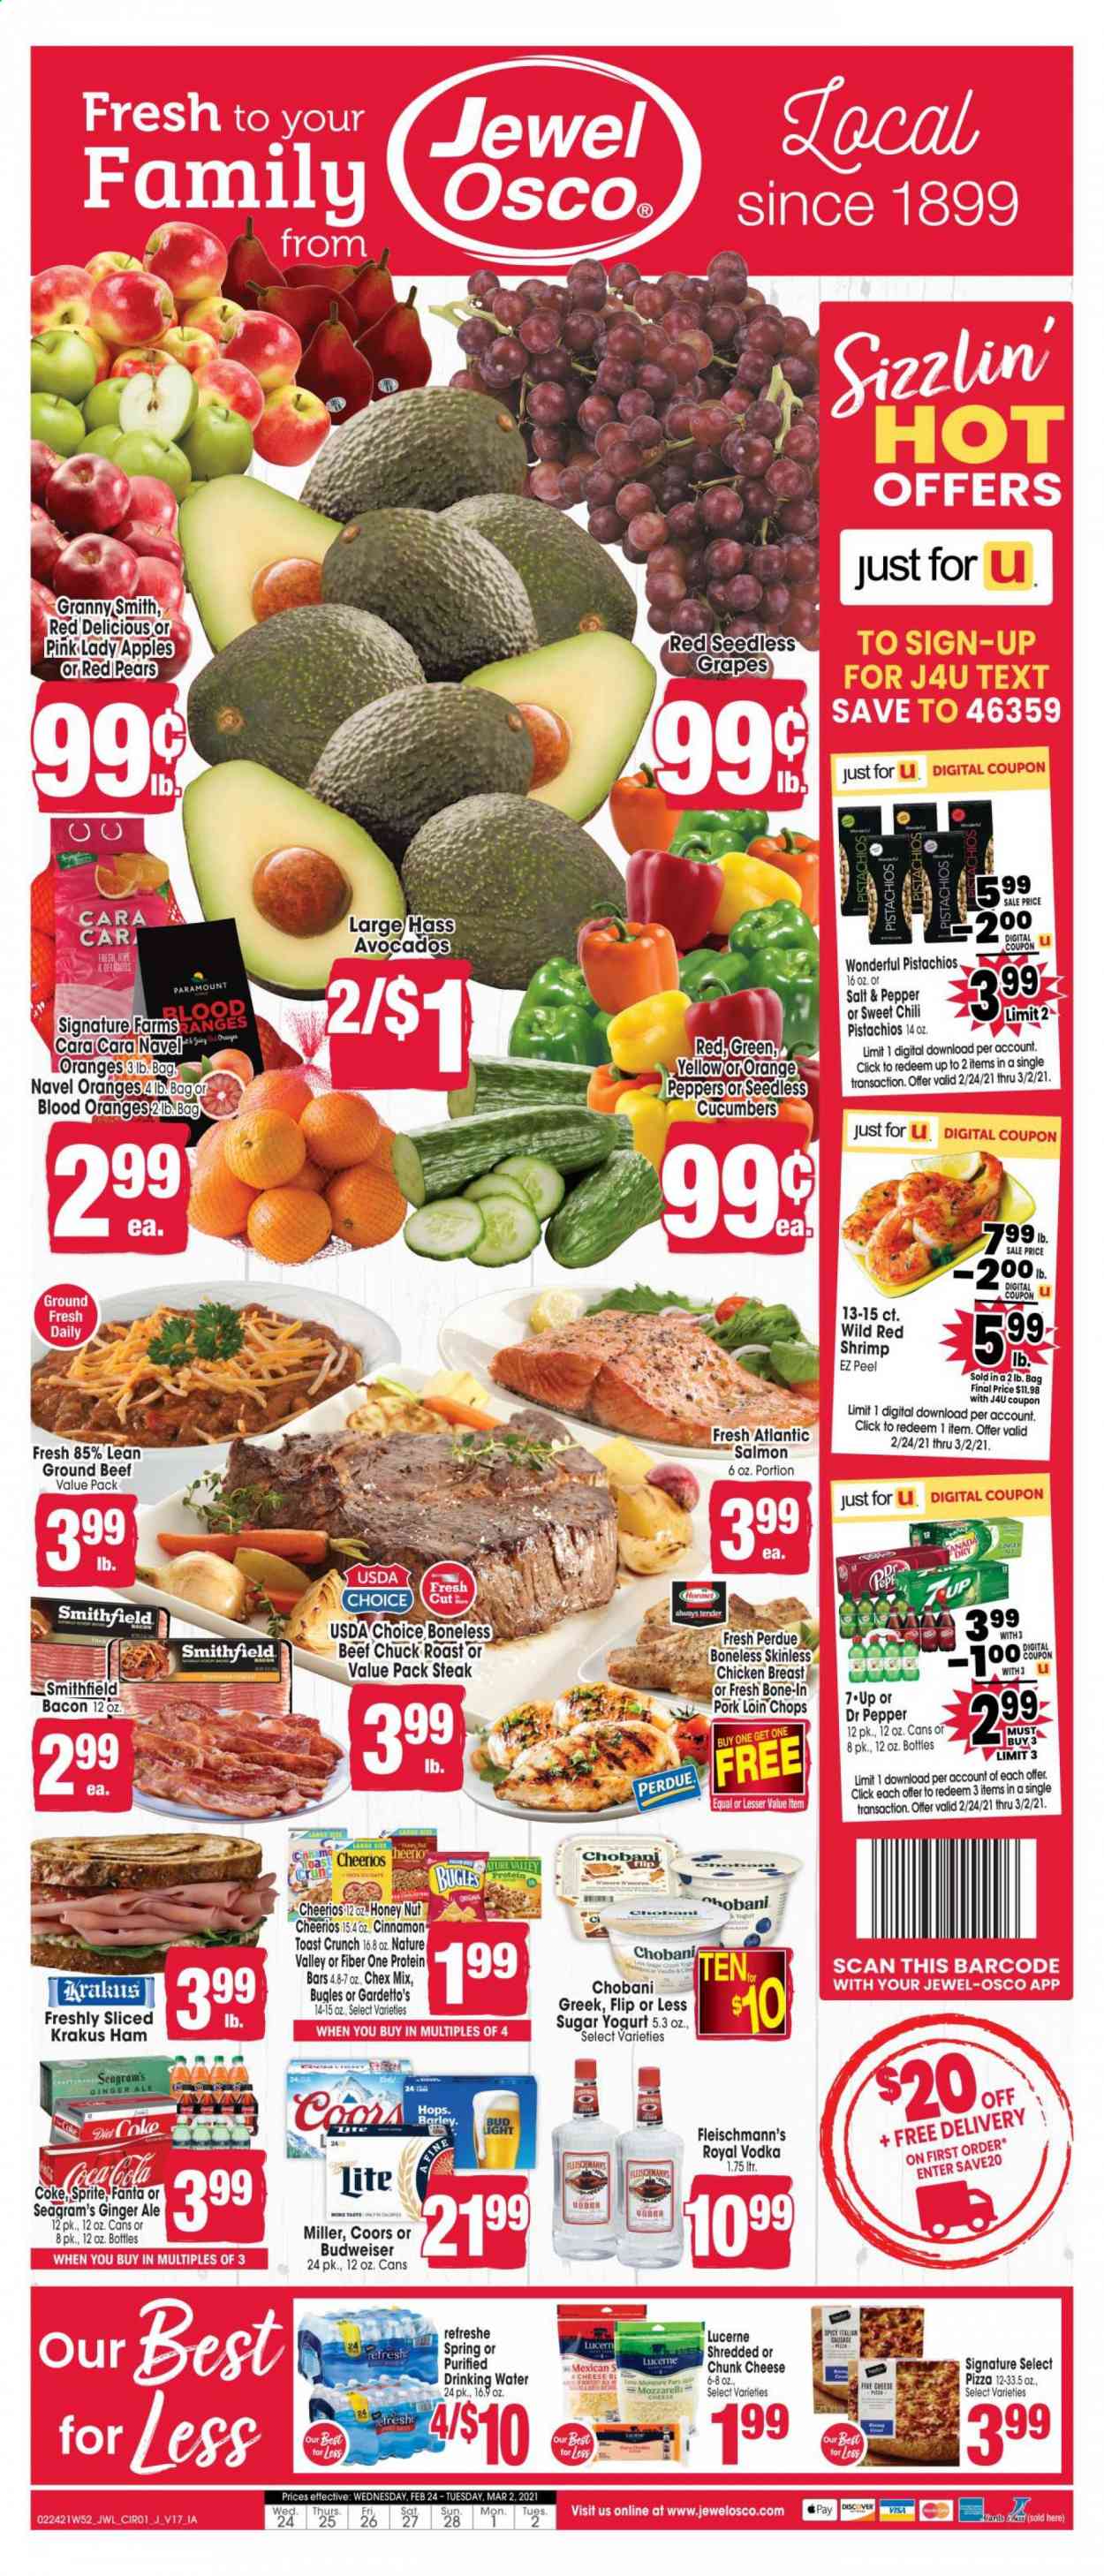 thumbnail - Jewel Osco Flyer - 02/24/2021 - 03/02/2021 - Sales products - Budweiser, Coors, seedless grapes, toast bread, apples, pears, oranges, salmon, shrimps, pizza, Perdue®, bacon, ham, cheese, chunk cheese, yoghurt, Chobani, Chex Mix, cucumber, Cheerios, protein bar, Nature Valley, Fiber One, cinnamon, pistachios, Coca-Cola, ginger ale, Sprite, Fanta, Dr. Pepper, 7UP, vodka, beer, Bud Light, Miller, chicken breasts, beef meat, ground beef, steak, chuck roast, pork loin, pork meat. Page 1.